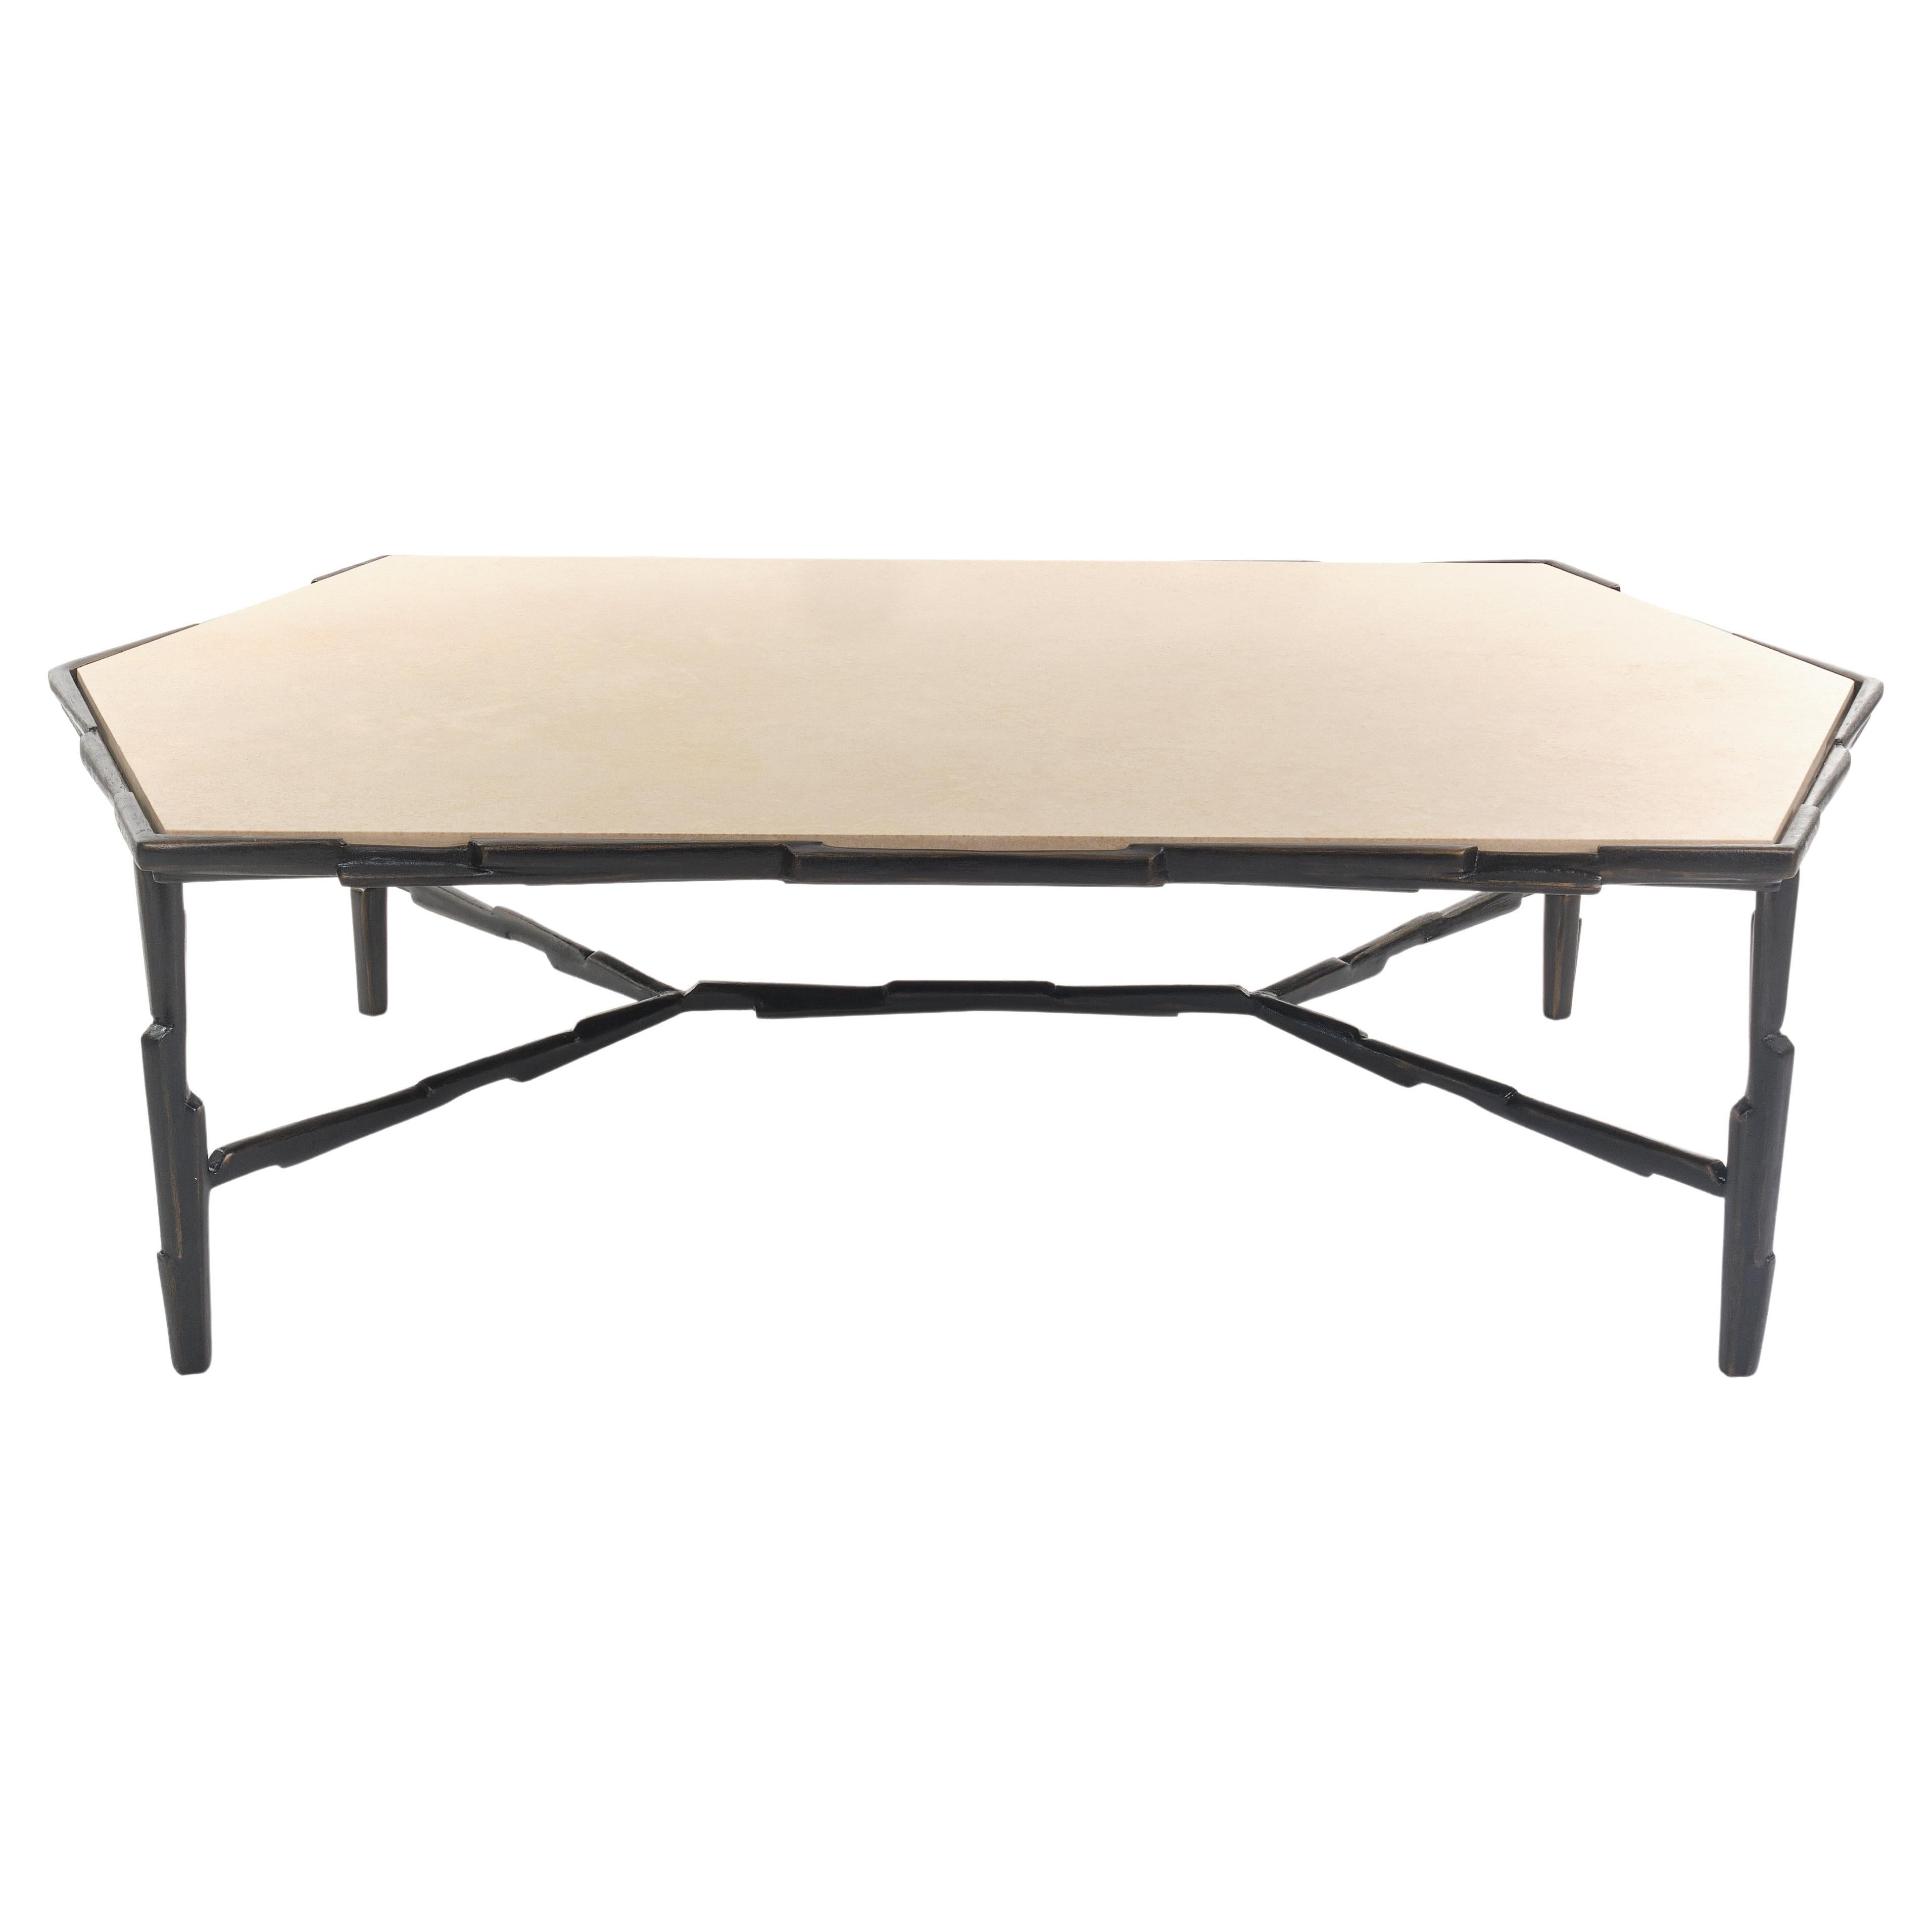 “Linea No.2”, Limited Edition Coffee Table, Bronze Plaster Finish, Benediko For Sale